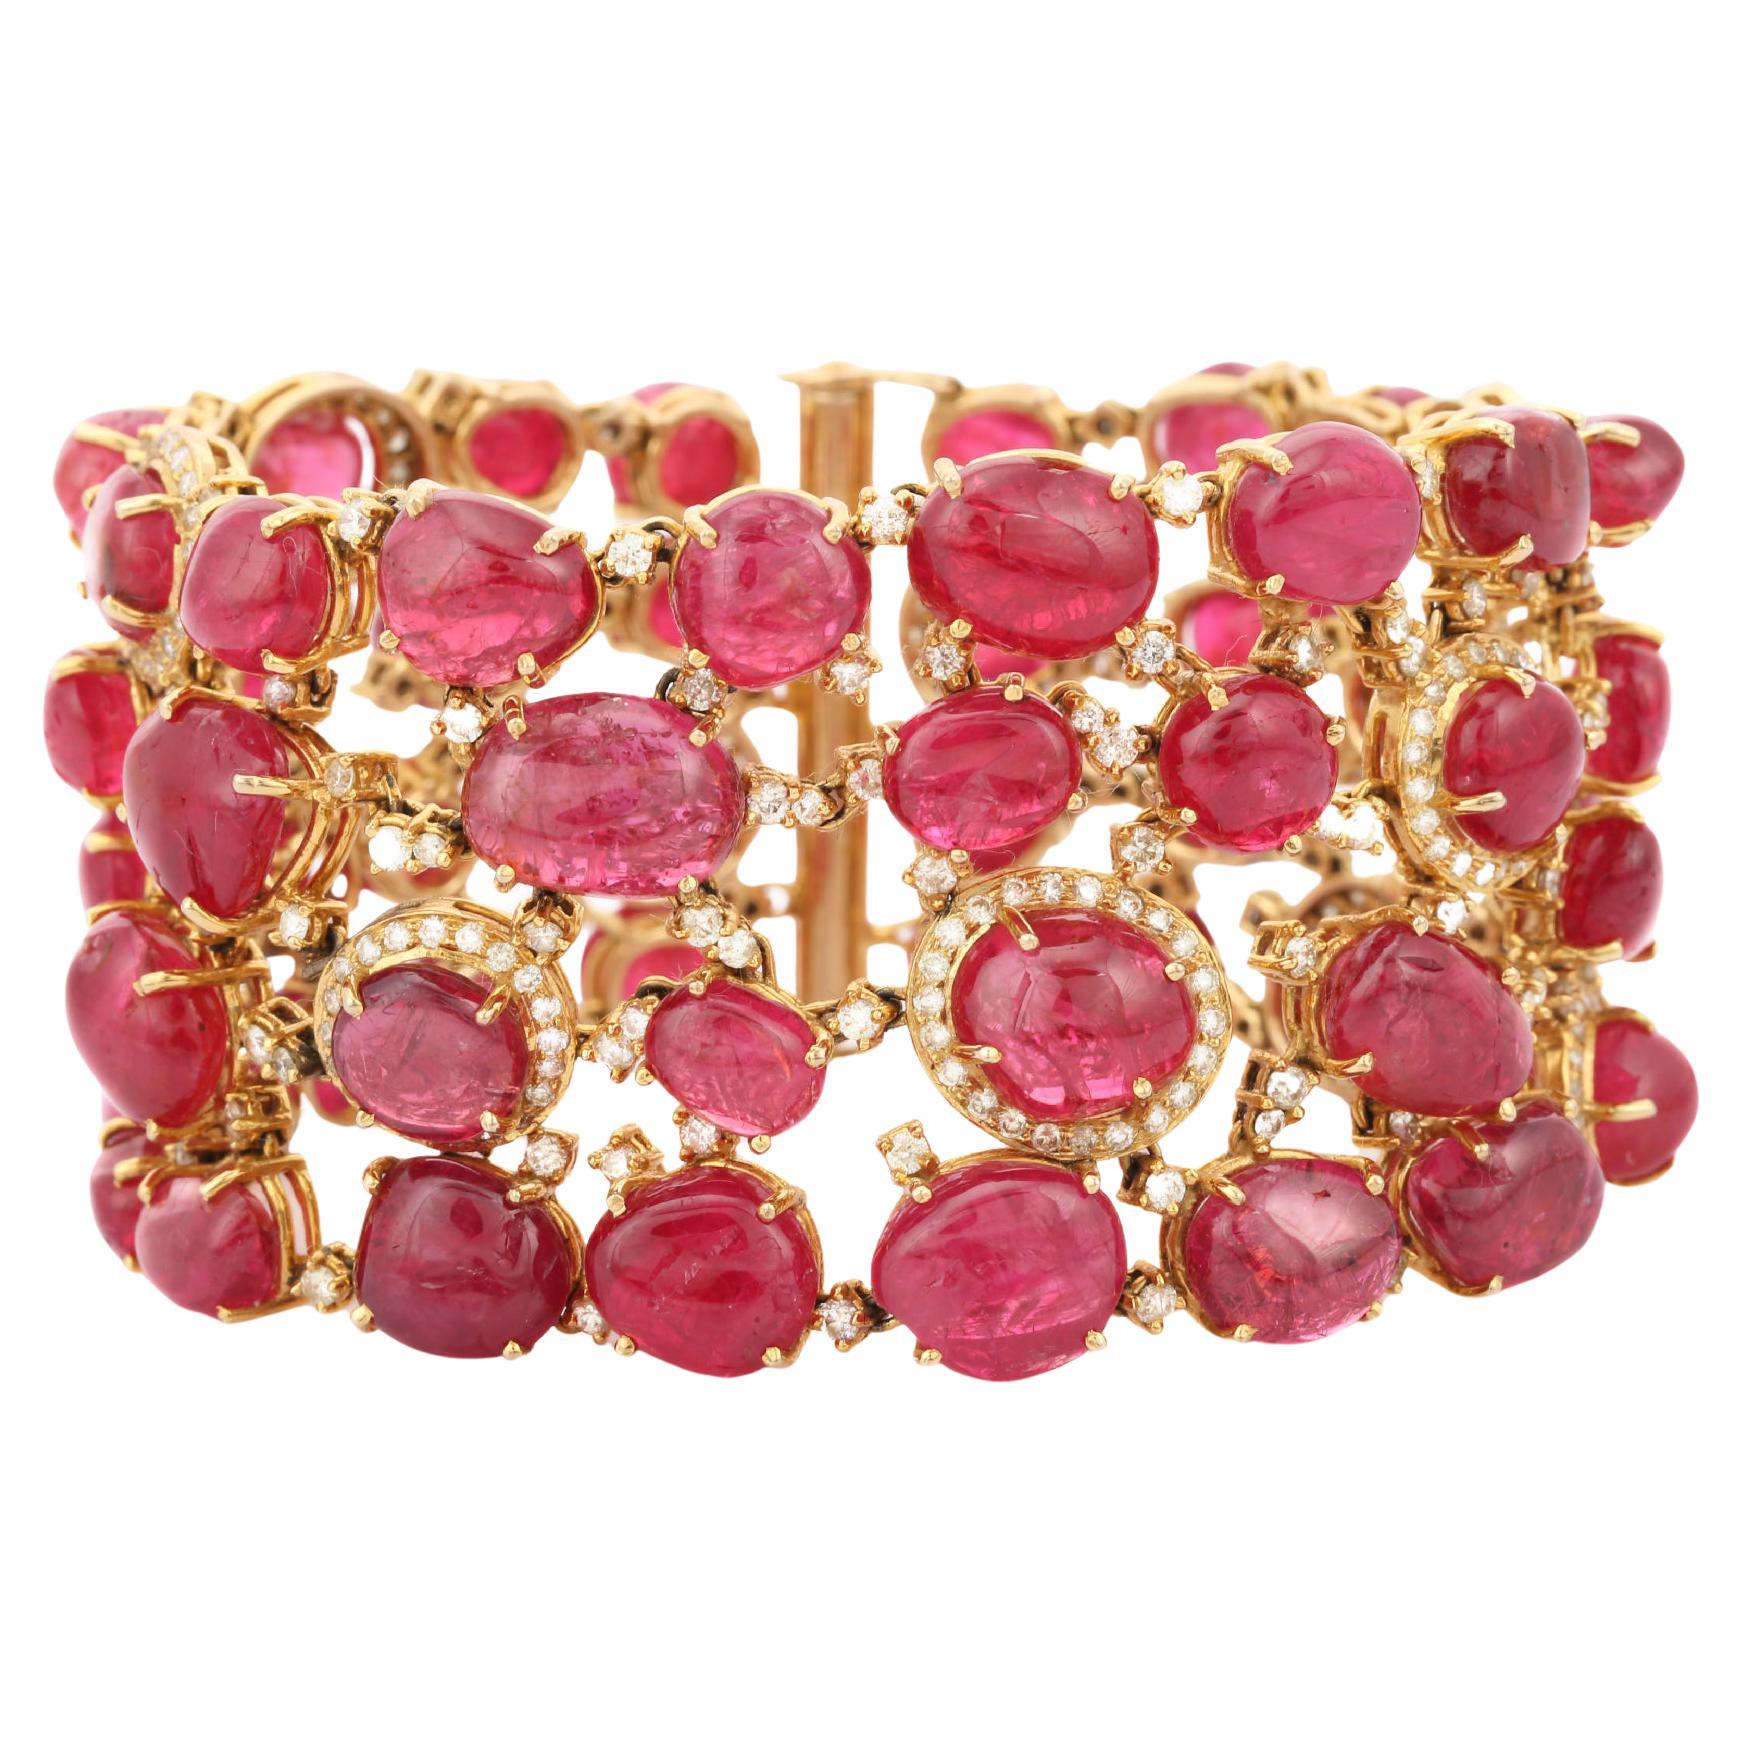 18kt Solid Yellow Gold 207.68 Carat TW Ruby Bracelet with 7.72 CTW Diamonds